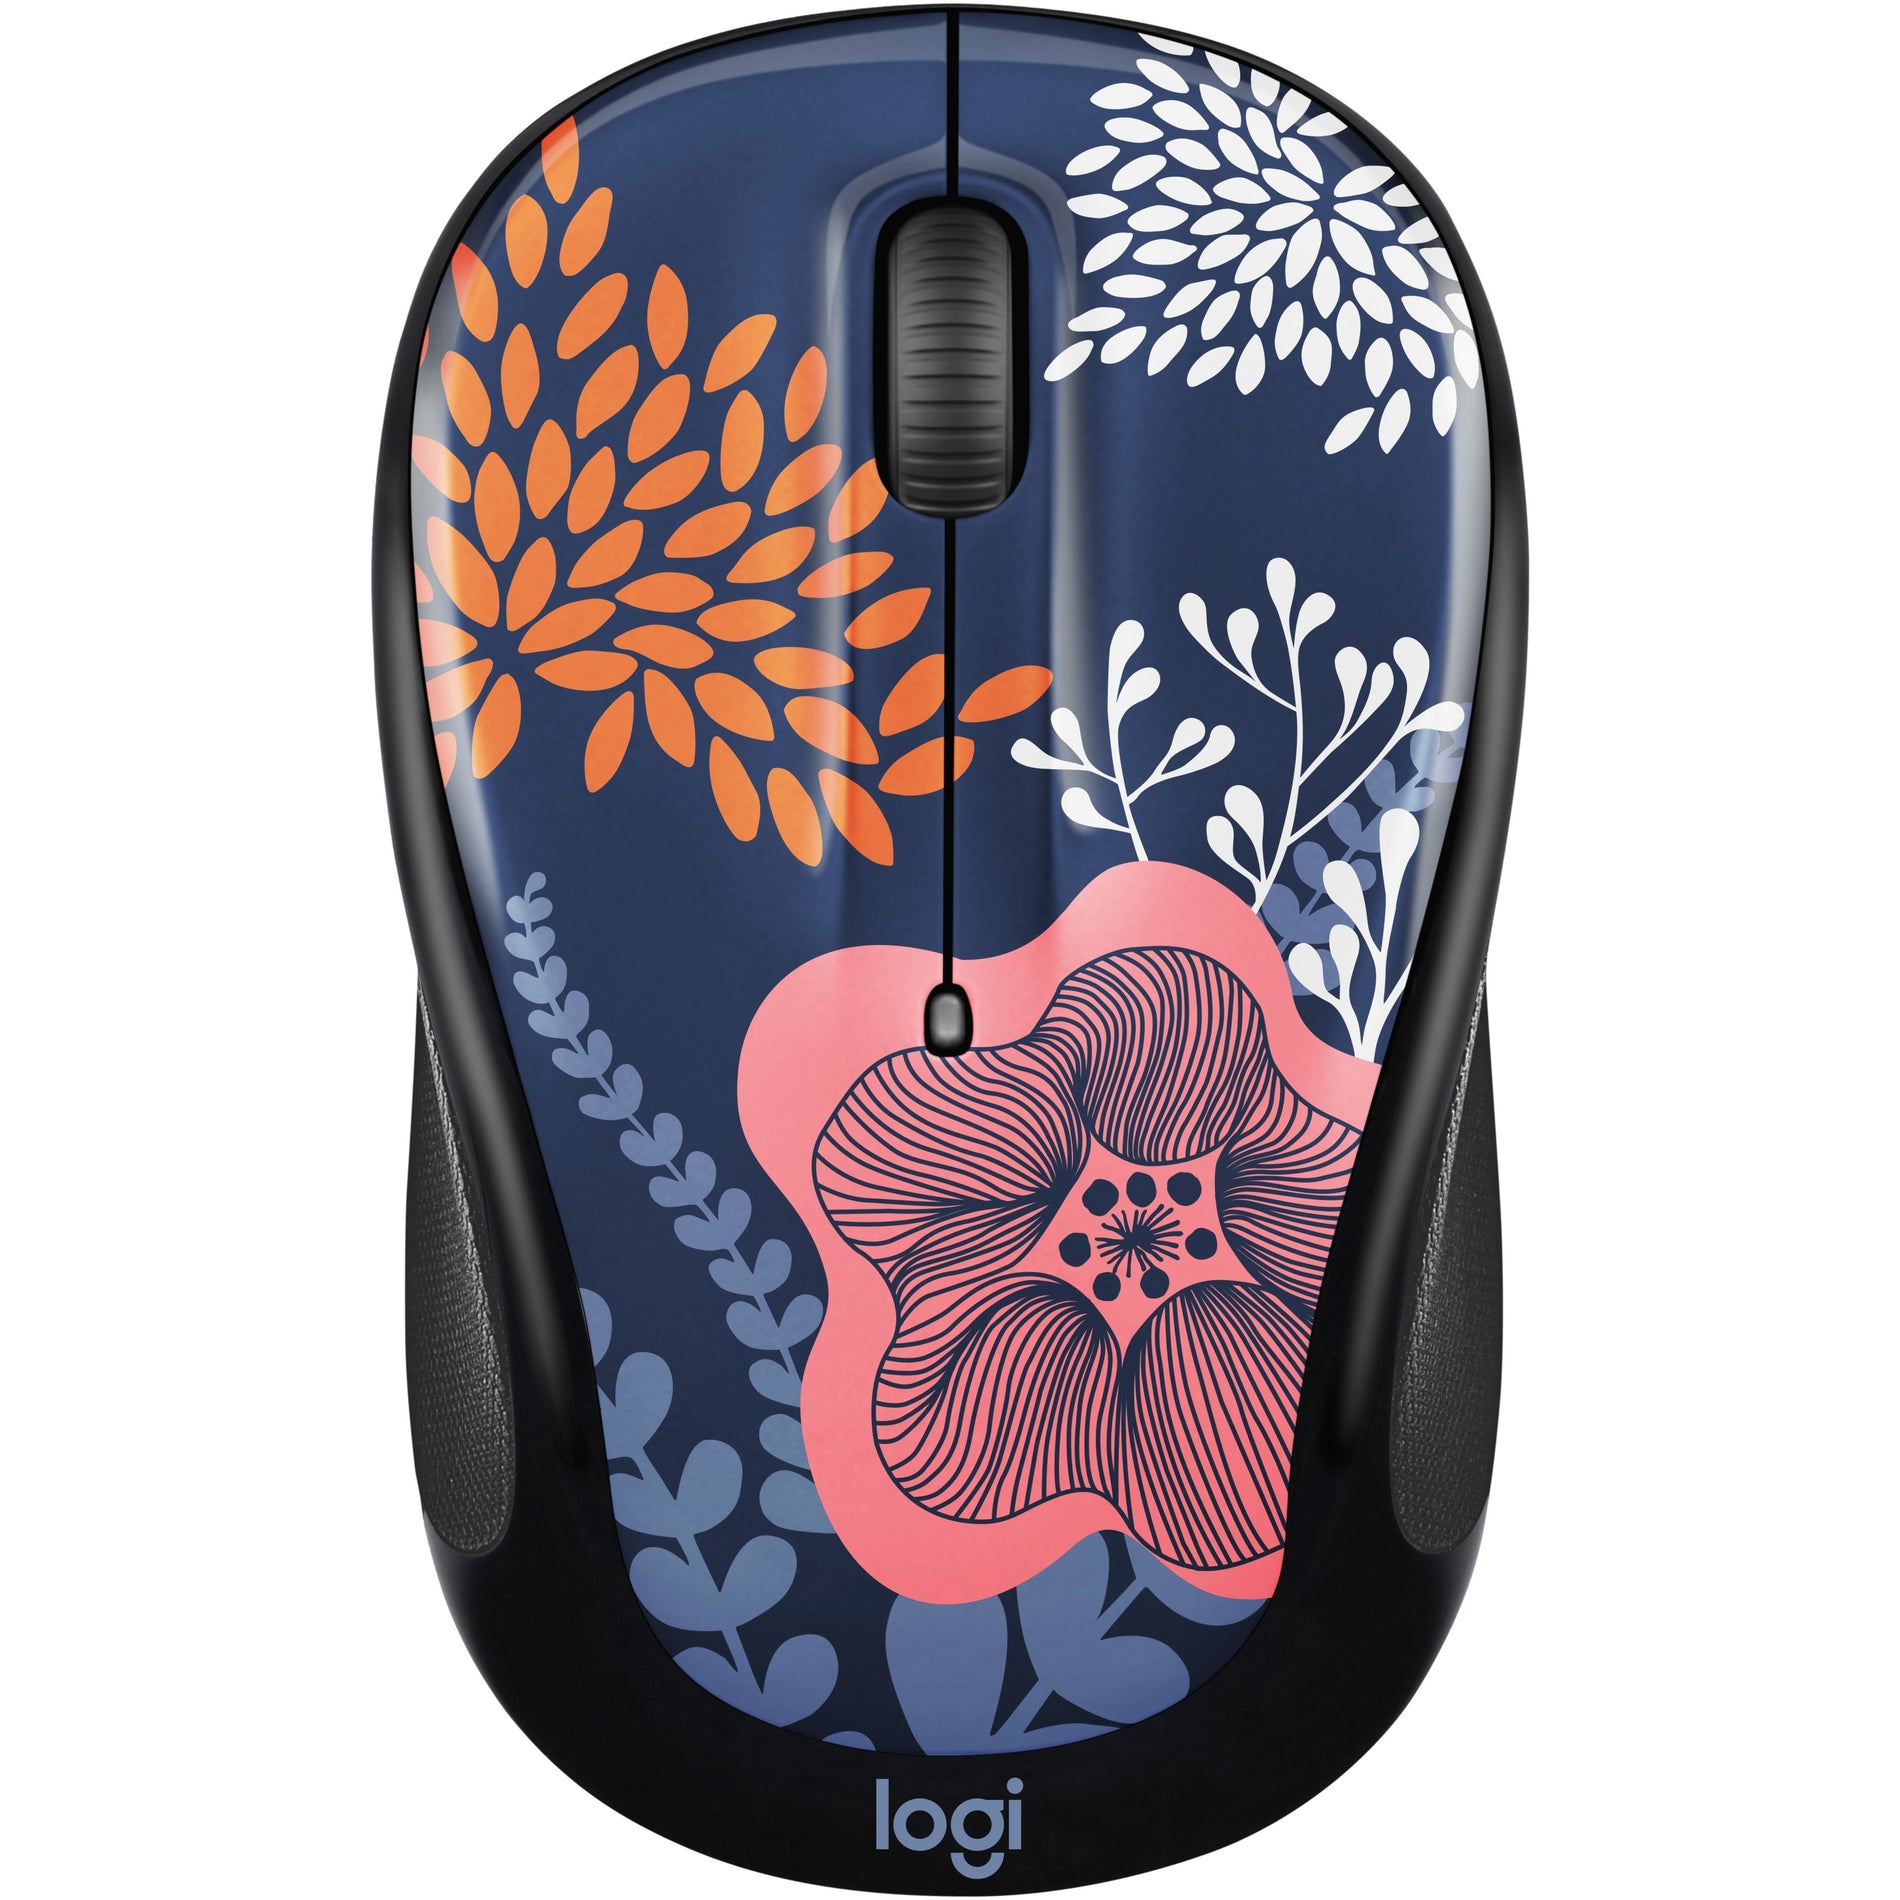 Logitech 910-006552 Design Collection Limited Edition Wireless Mouse, Forest Floral, Small Size, 2.4 GHz Wireless Technology